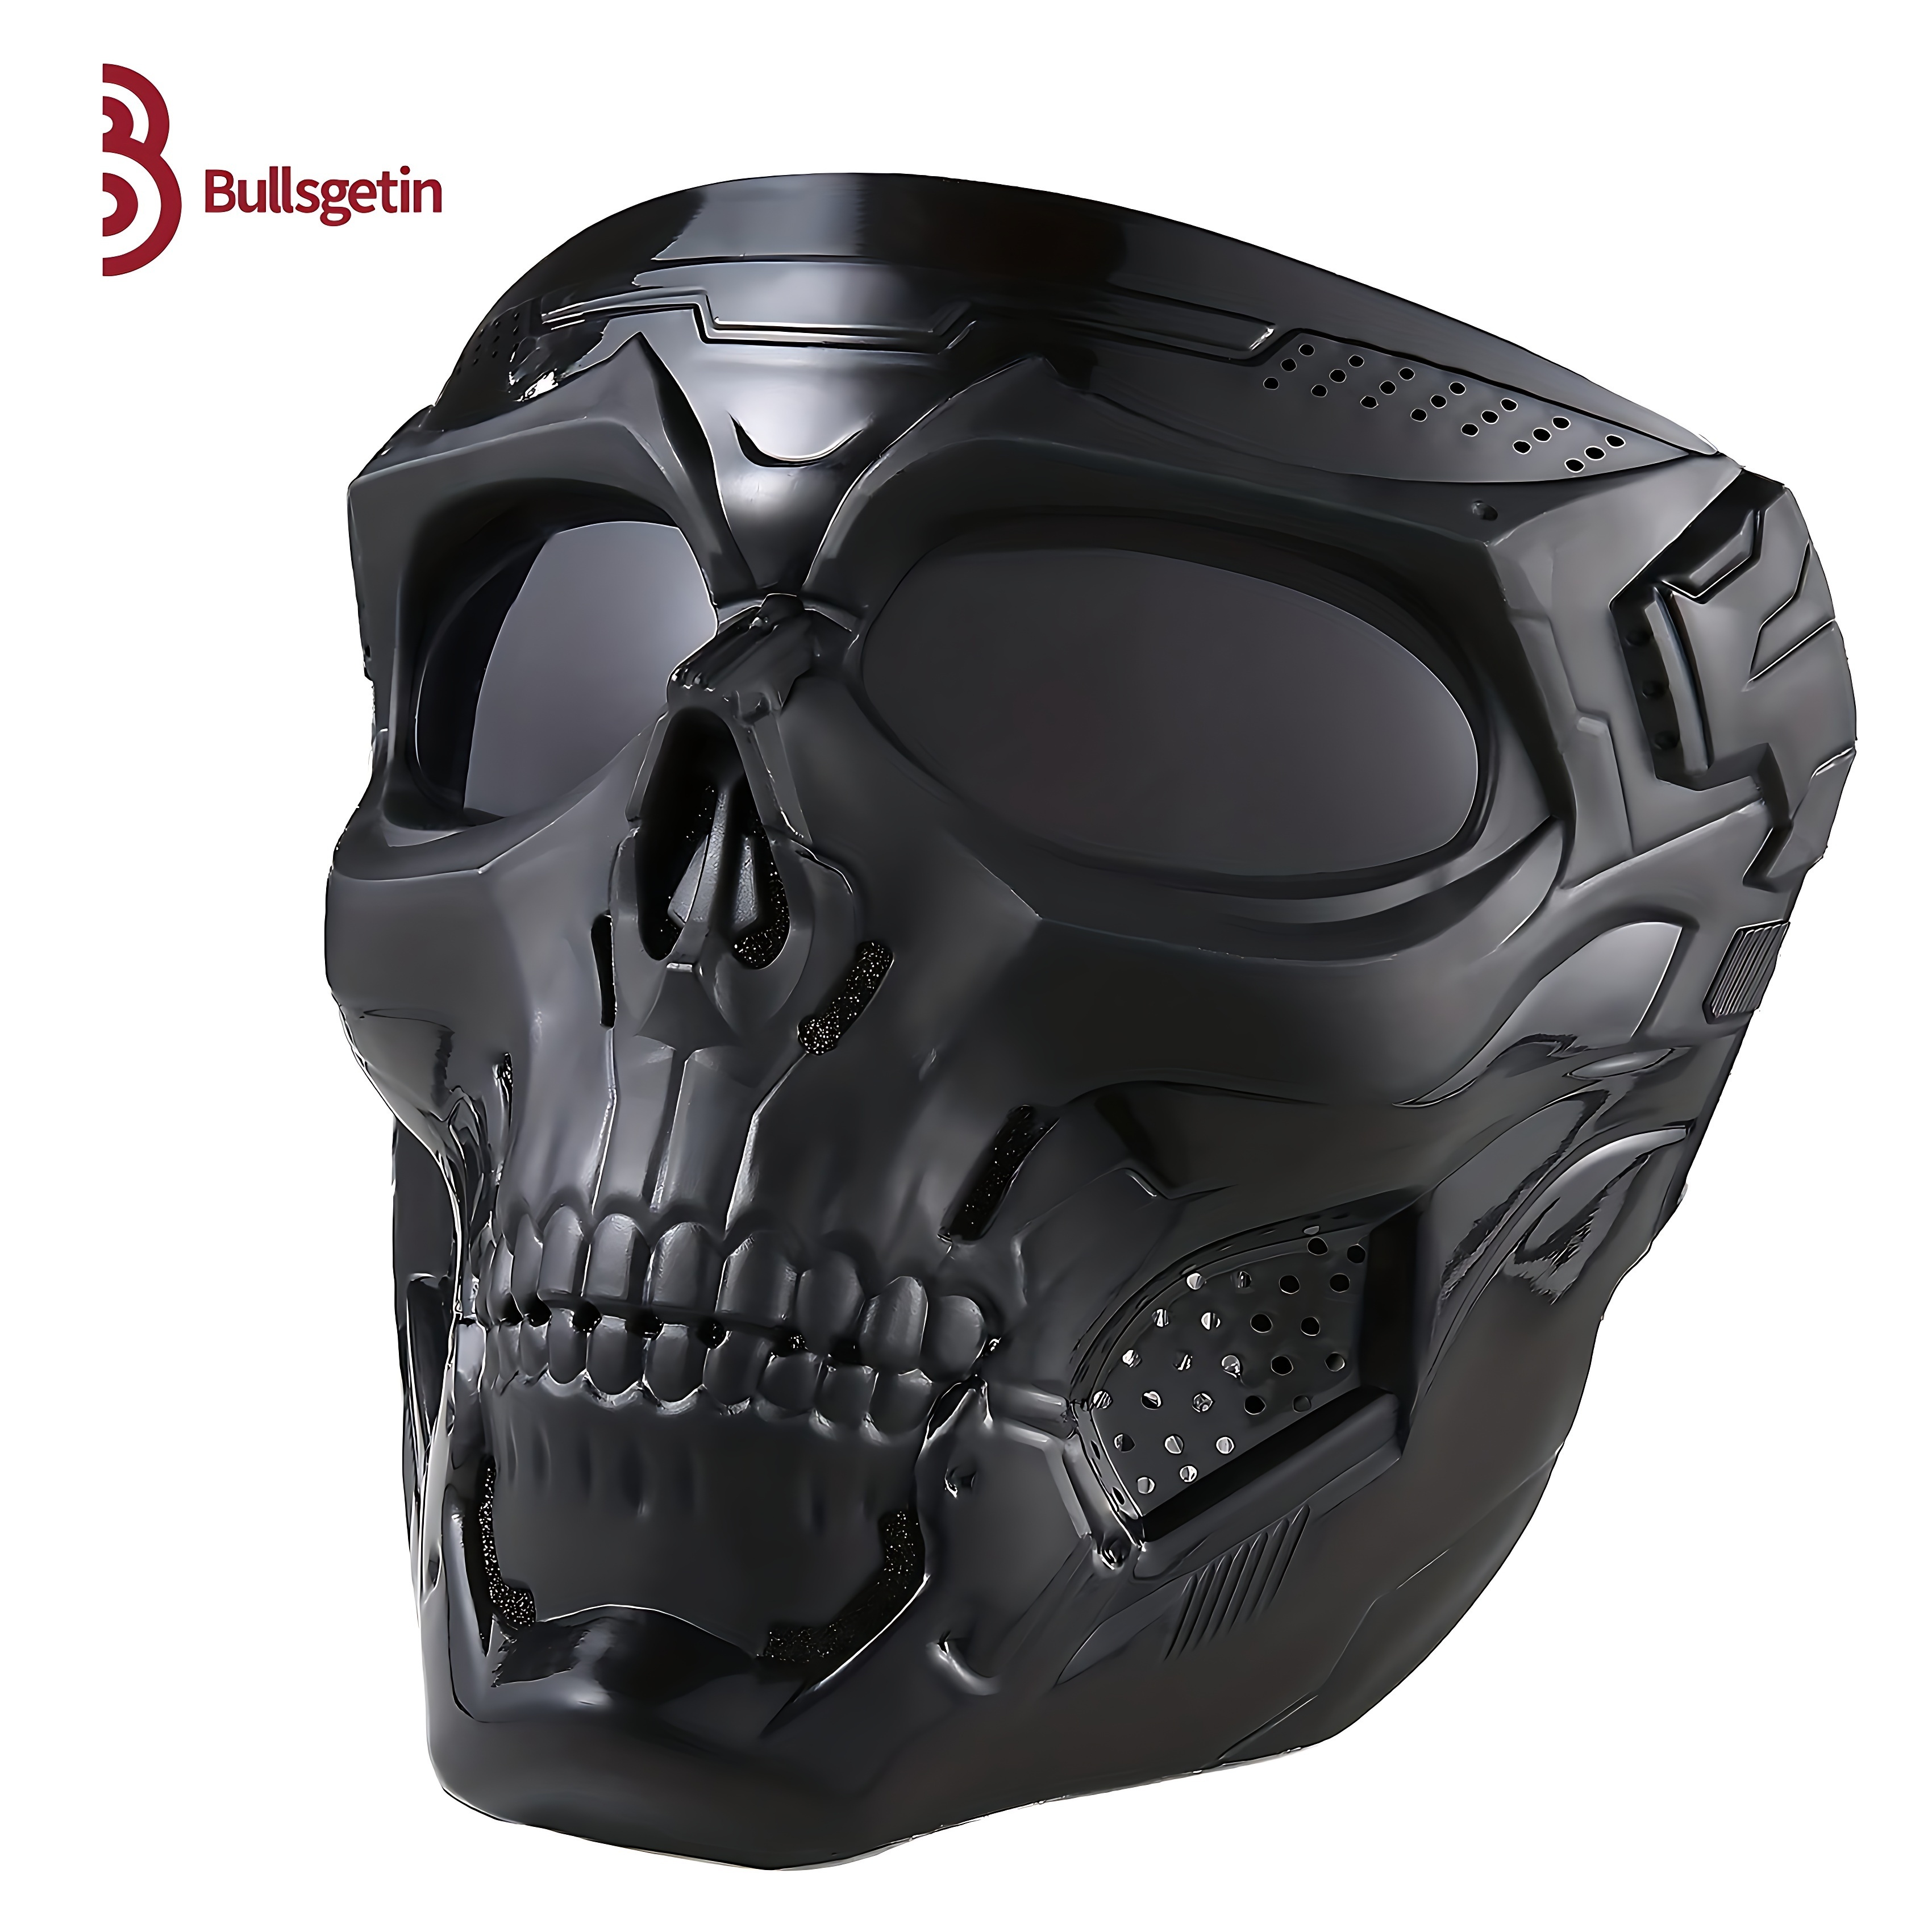 

Tactical Mask For Cs, Paintball, And Halloween - Full Face Protection And Scary Design